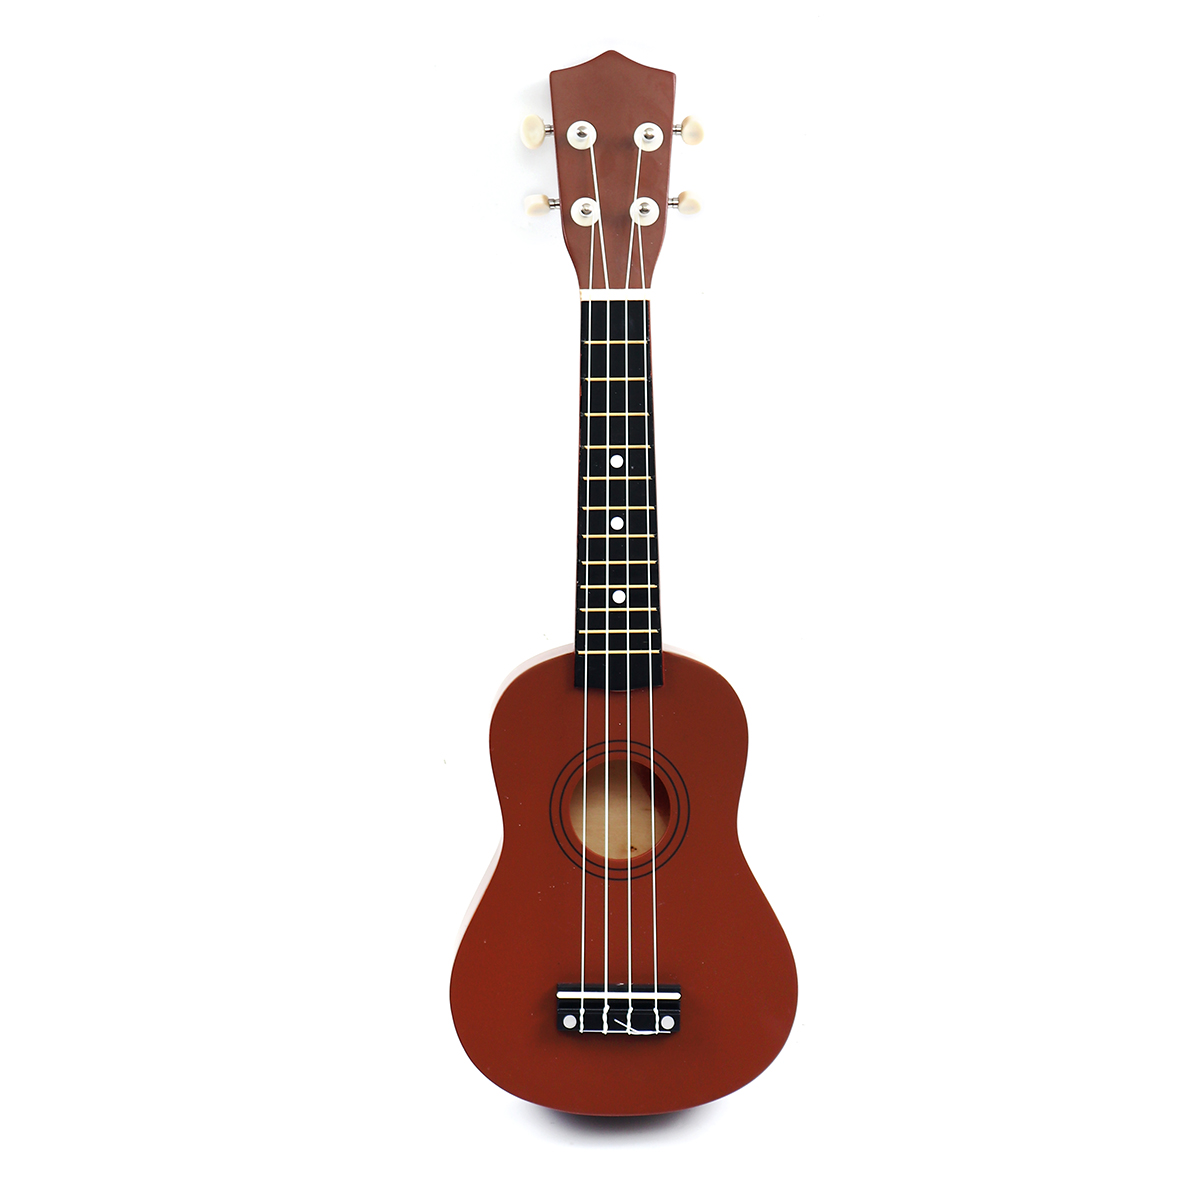 21 Inch 4 Strings Wood Hawaii Ukulele Musical Instrument with Gig Bag Strings Tuner Strap